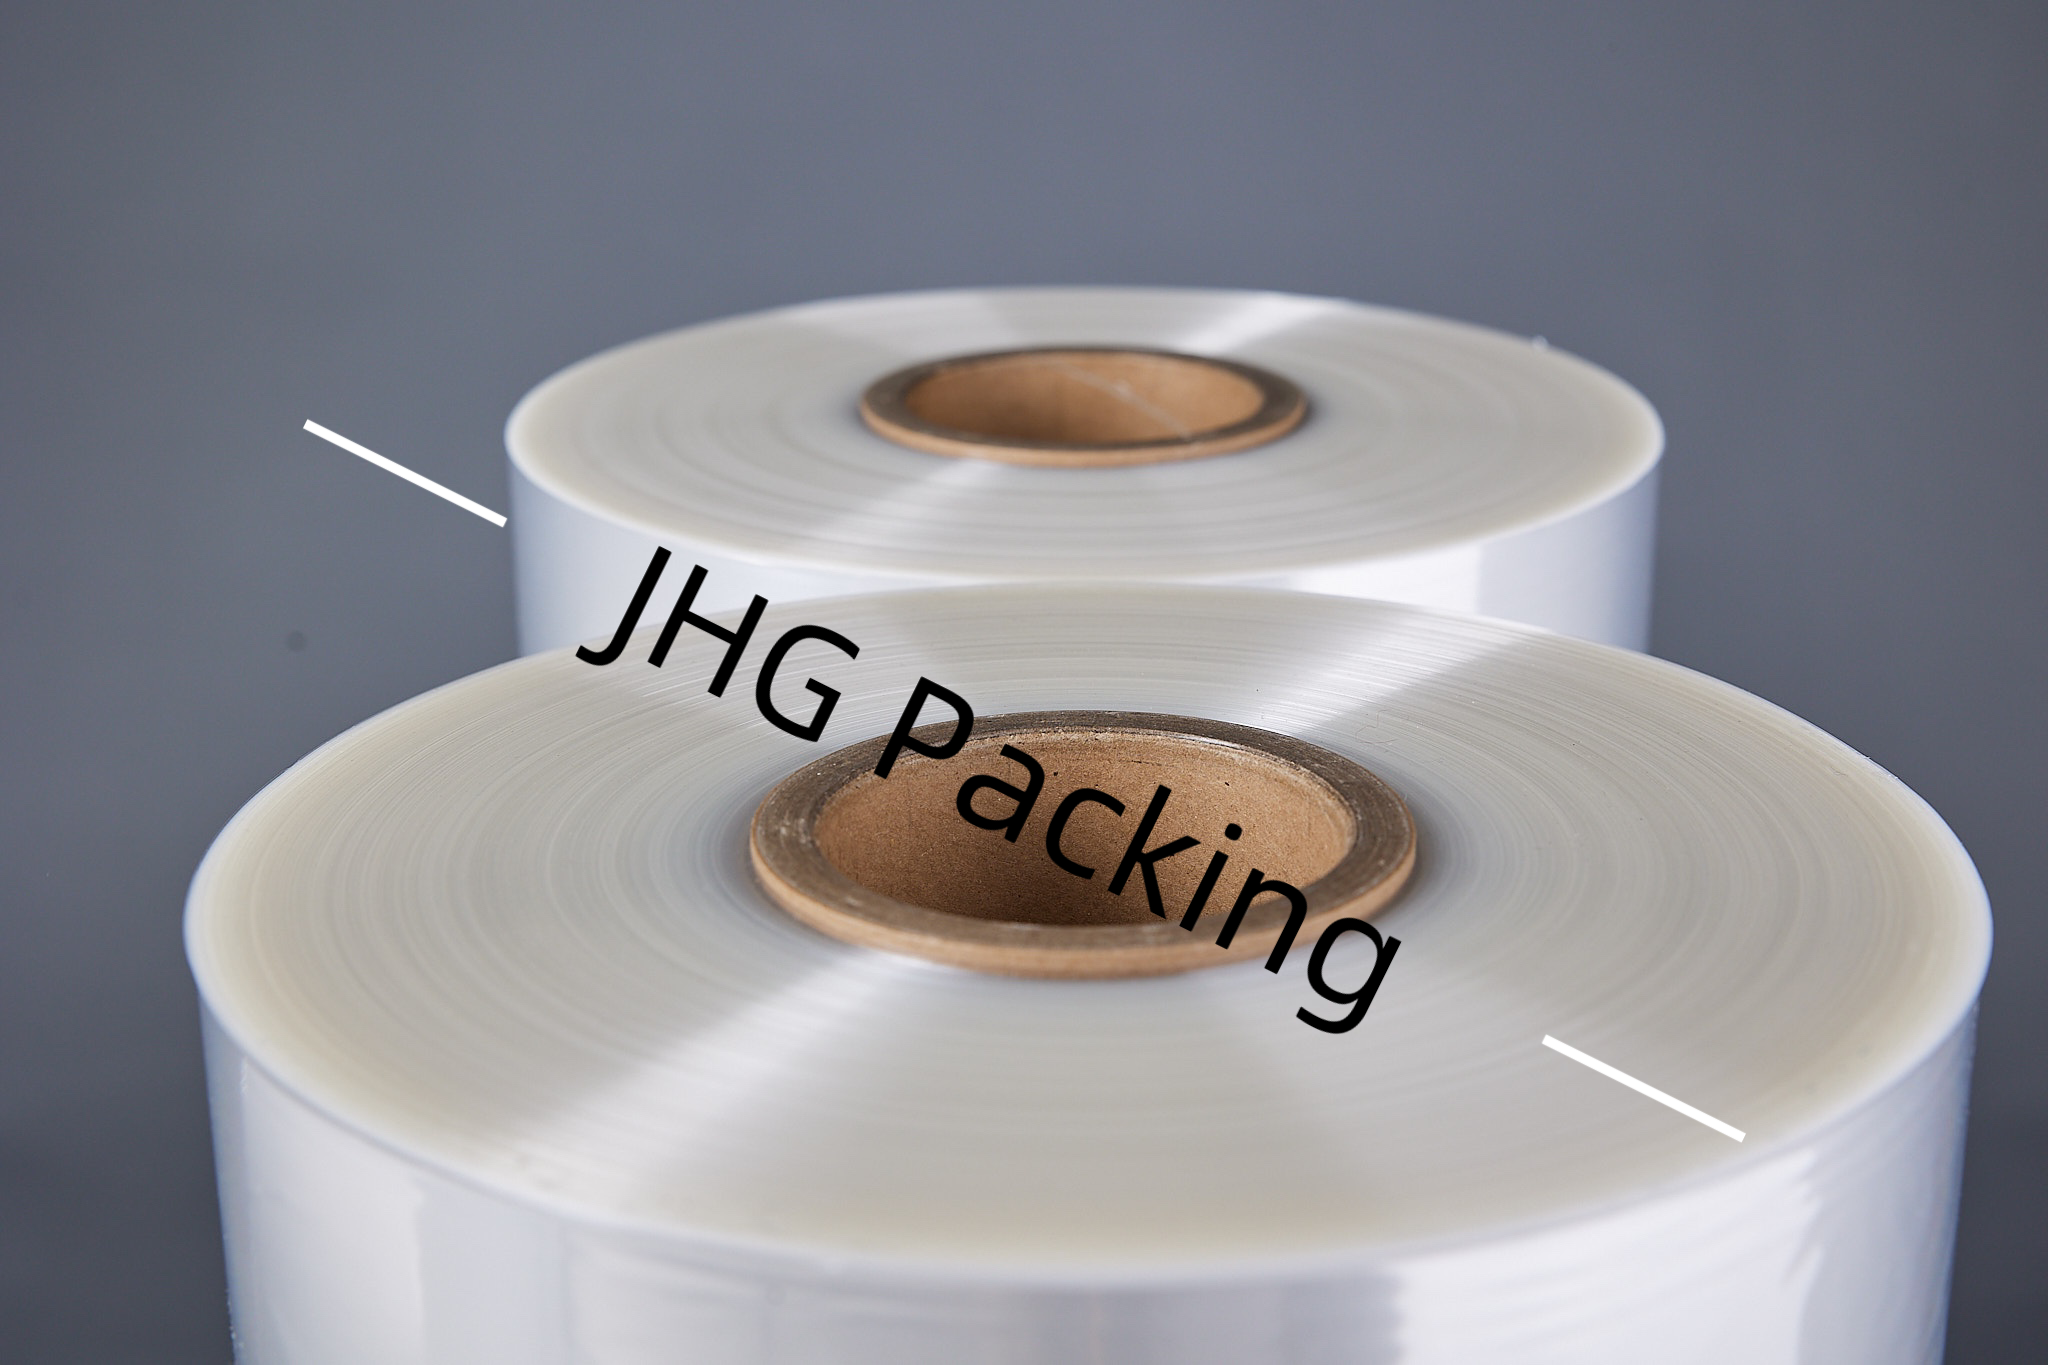  50 60 75 Gauge Customized Polyolefin Heat Shrink Packing Film Roll Manufacturers